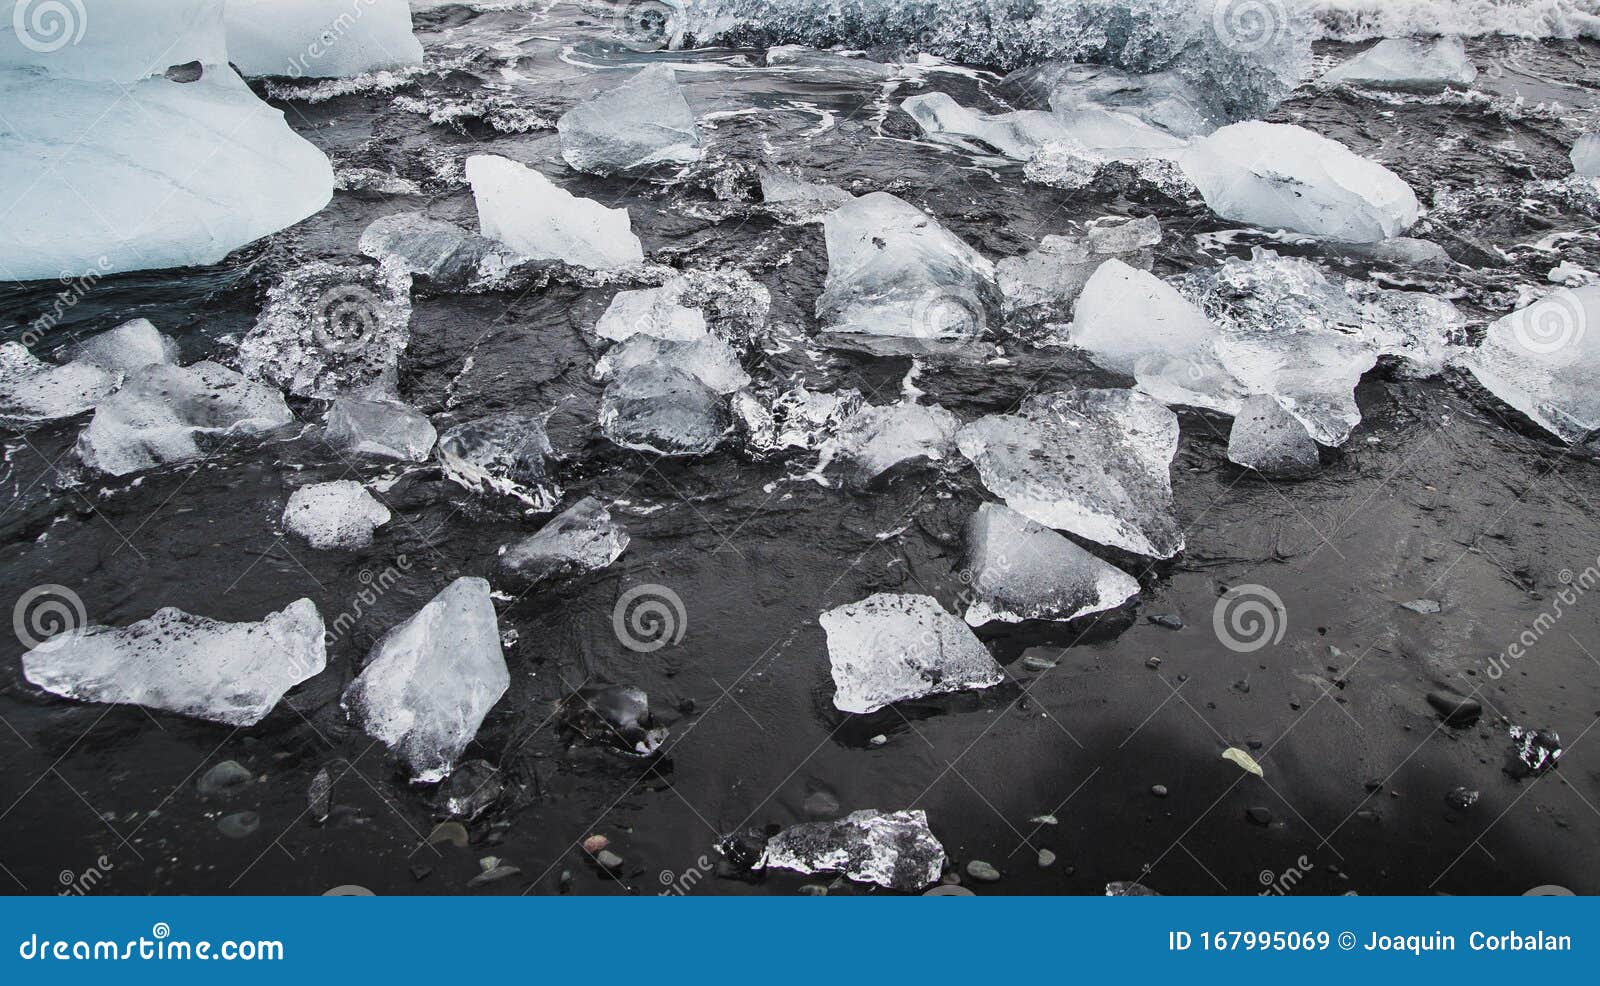 Giant Ice Blocks Detached from Icebergs on the Coast of an Icelandic ...